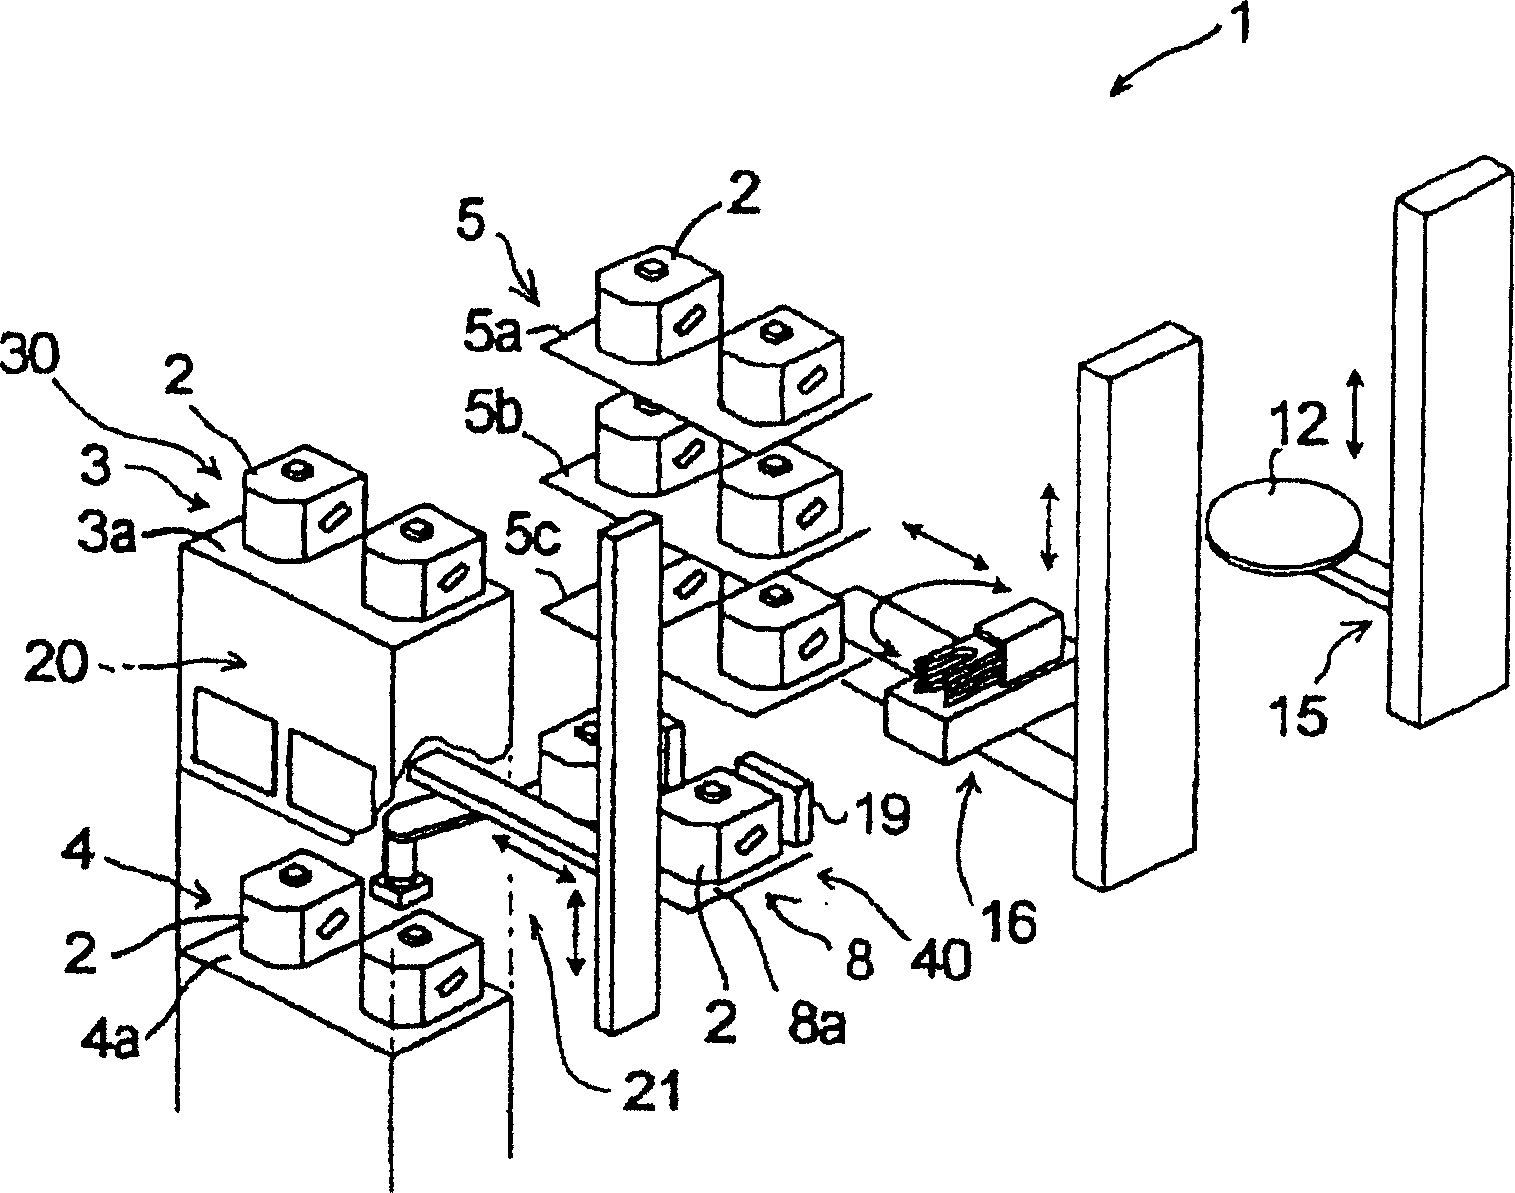 Vertical heat treatment apparatus and method for operating same